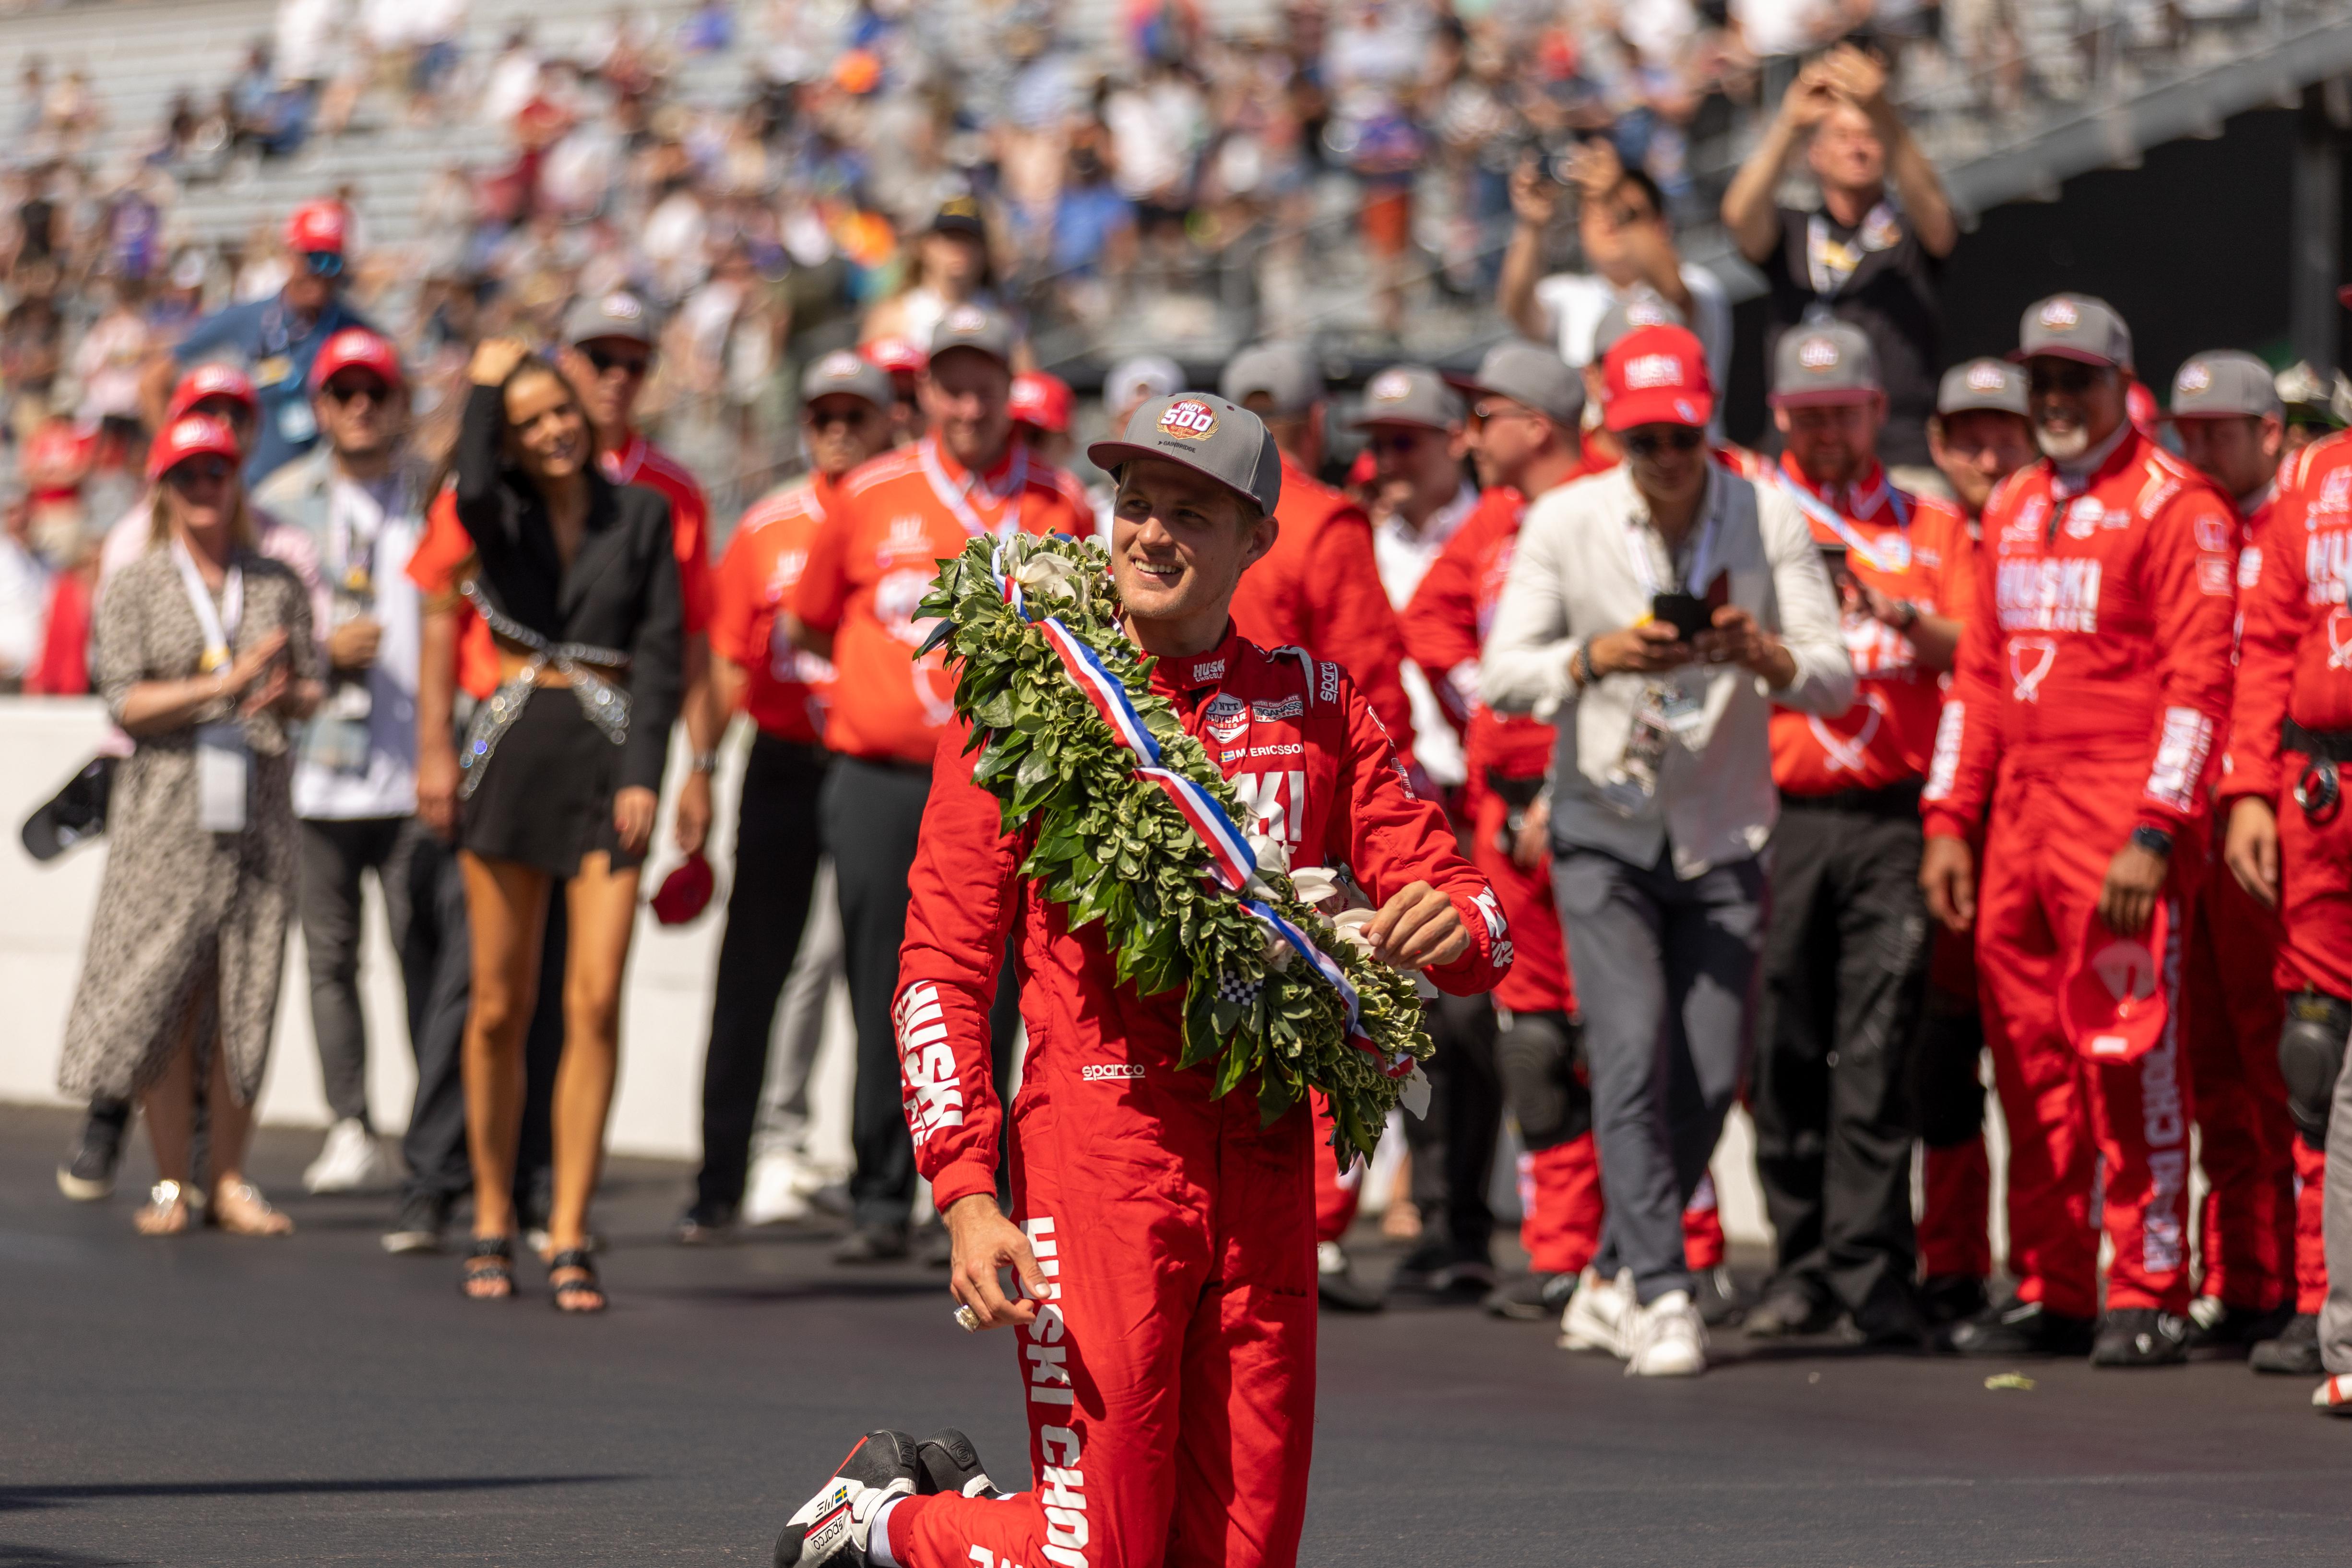 106th Running Of The Indianapolis 500 Presented By Gainbridge Sunday May 29 2022 Largeimagewithoutwatermark M60073